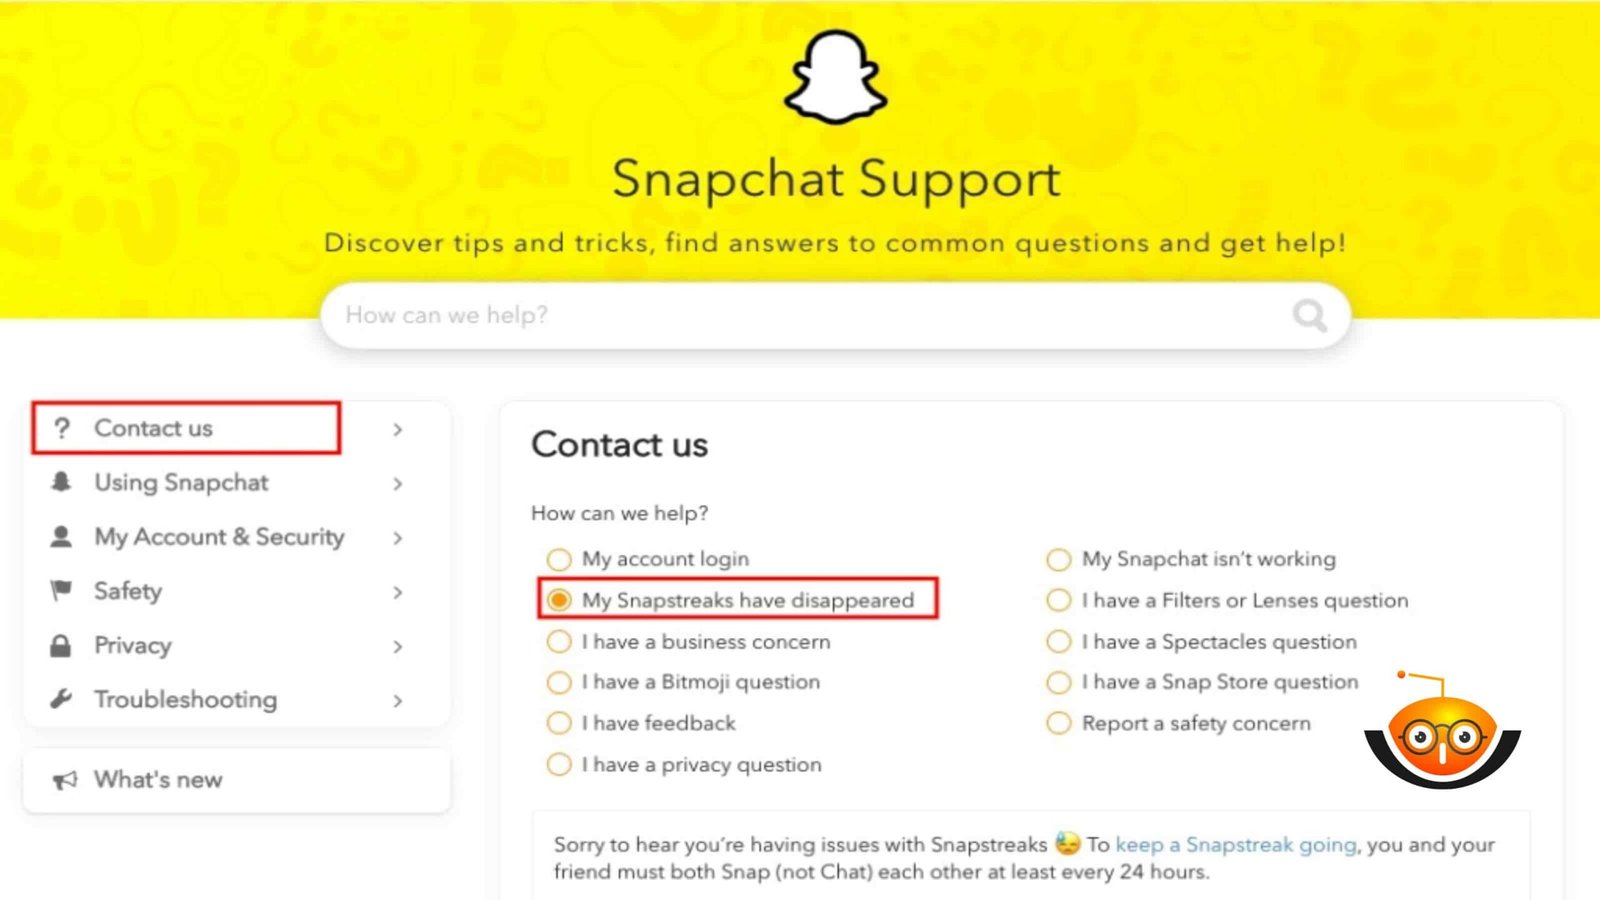 How to Recover Deleted Snapchat Messages - technious.com